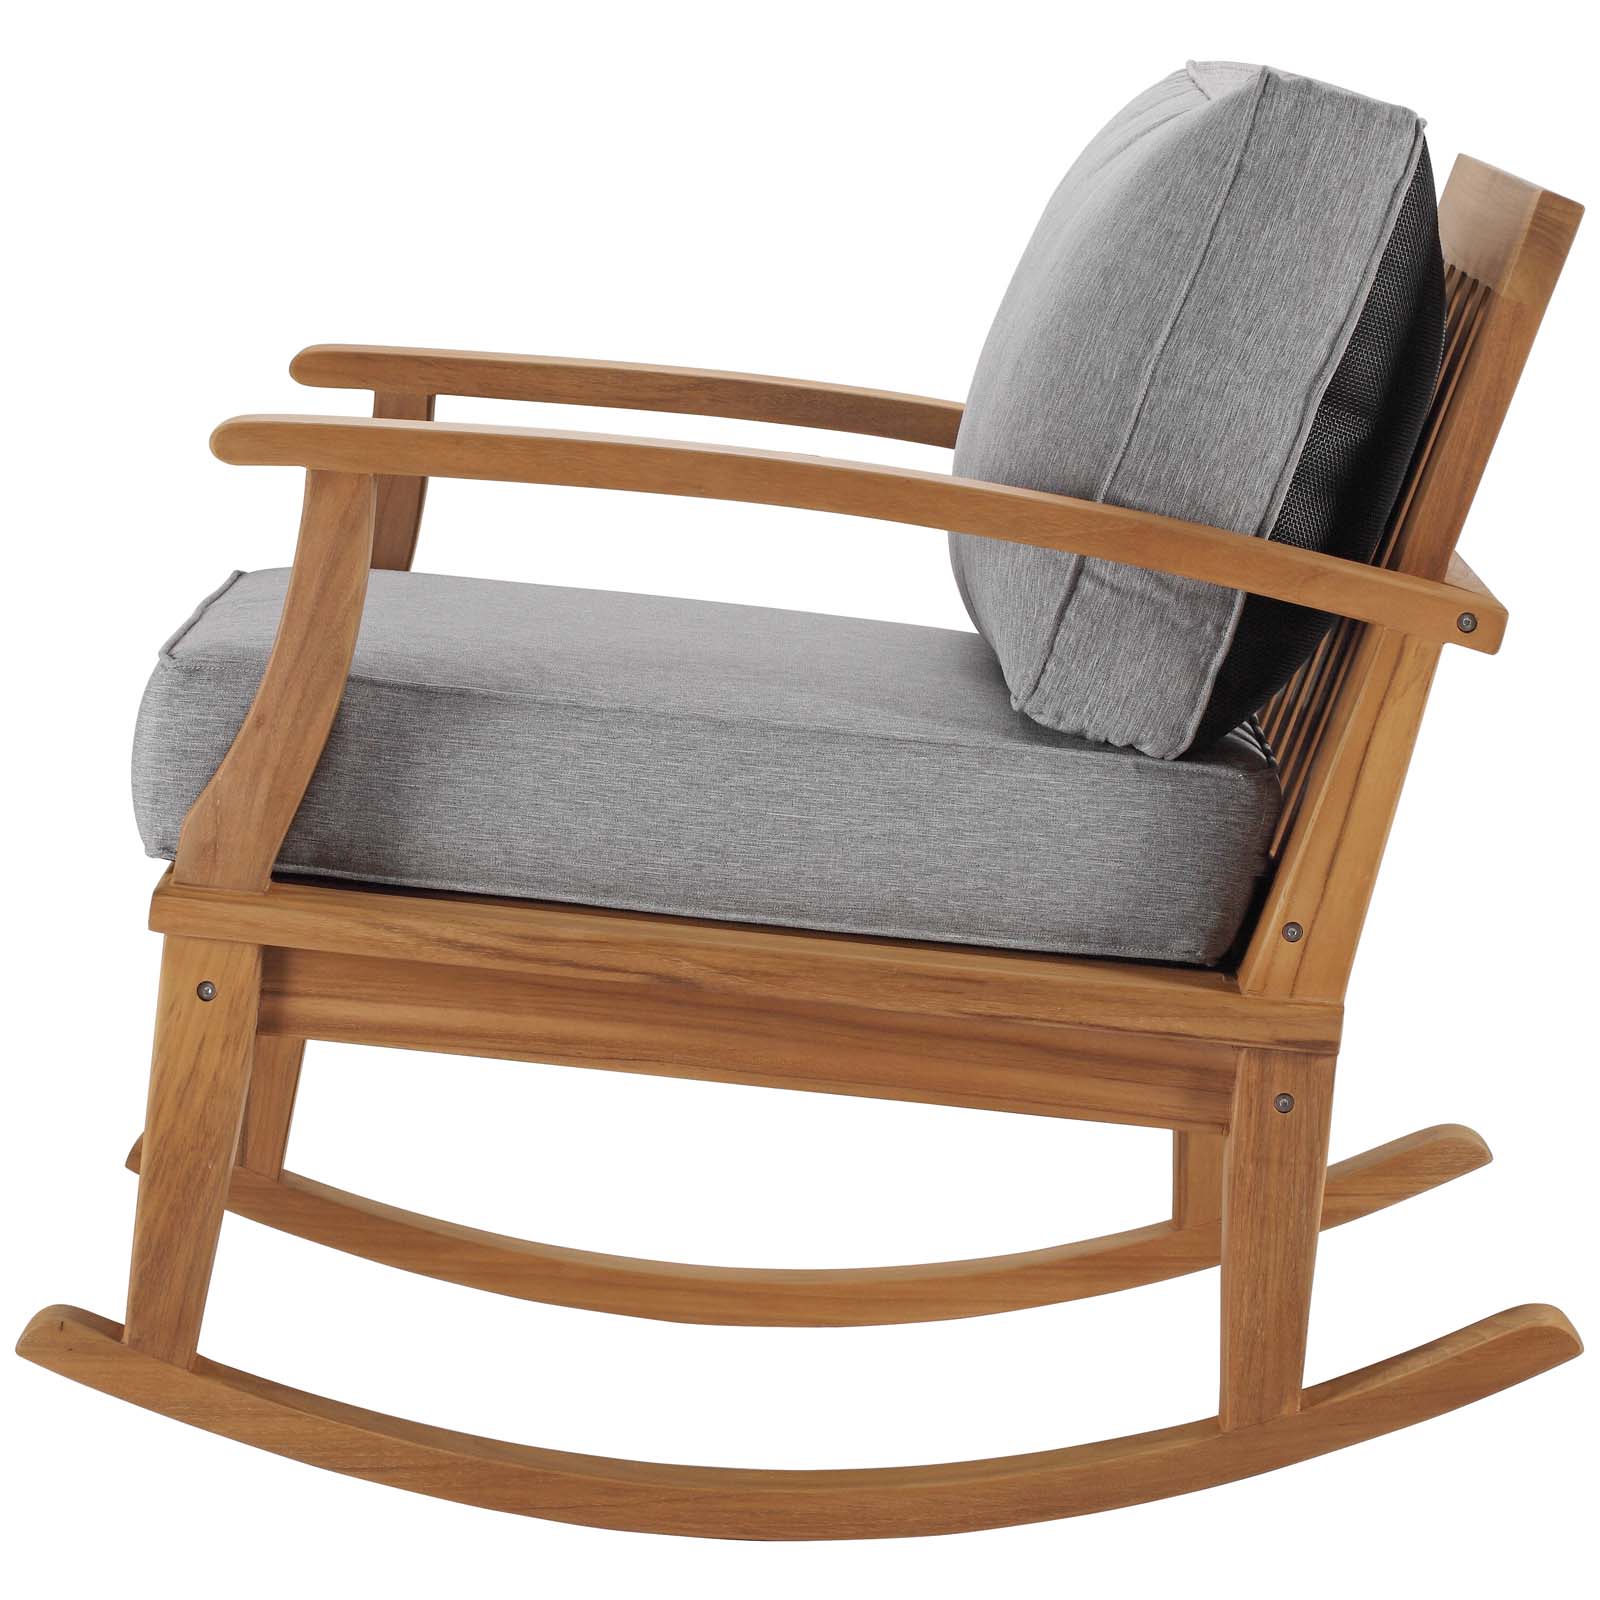 Lounge Rocking Chair, Wood, Brown Natural Grey Gray, Modern Contemporary Urban Design, Outdoor Patio Balcony Cafe Bistro Garden Furniture Hotel Hospitality - image 3 of 8